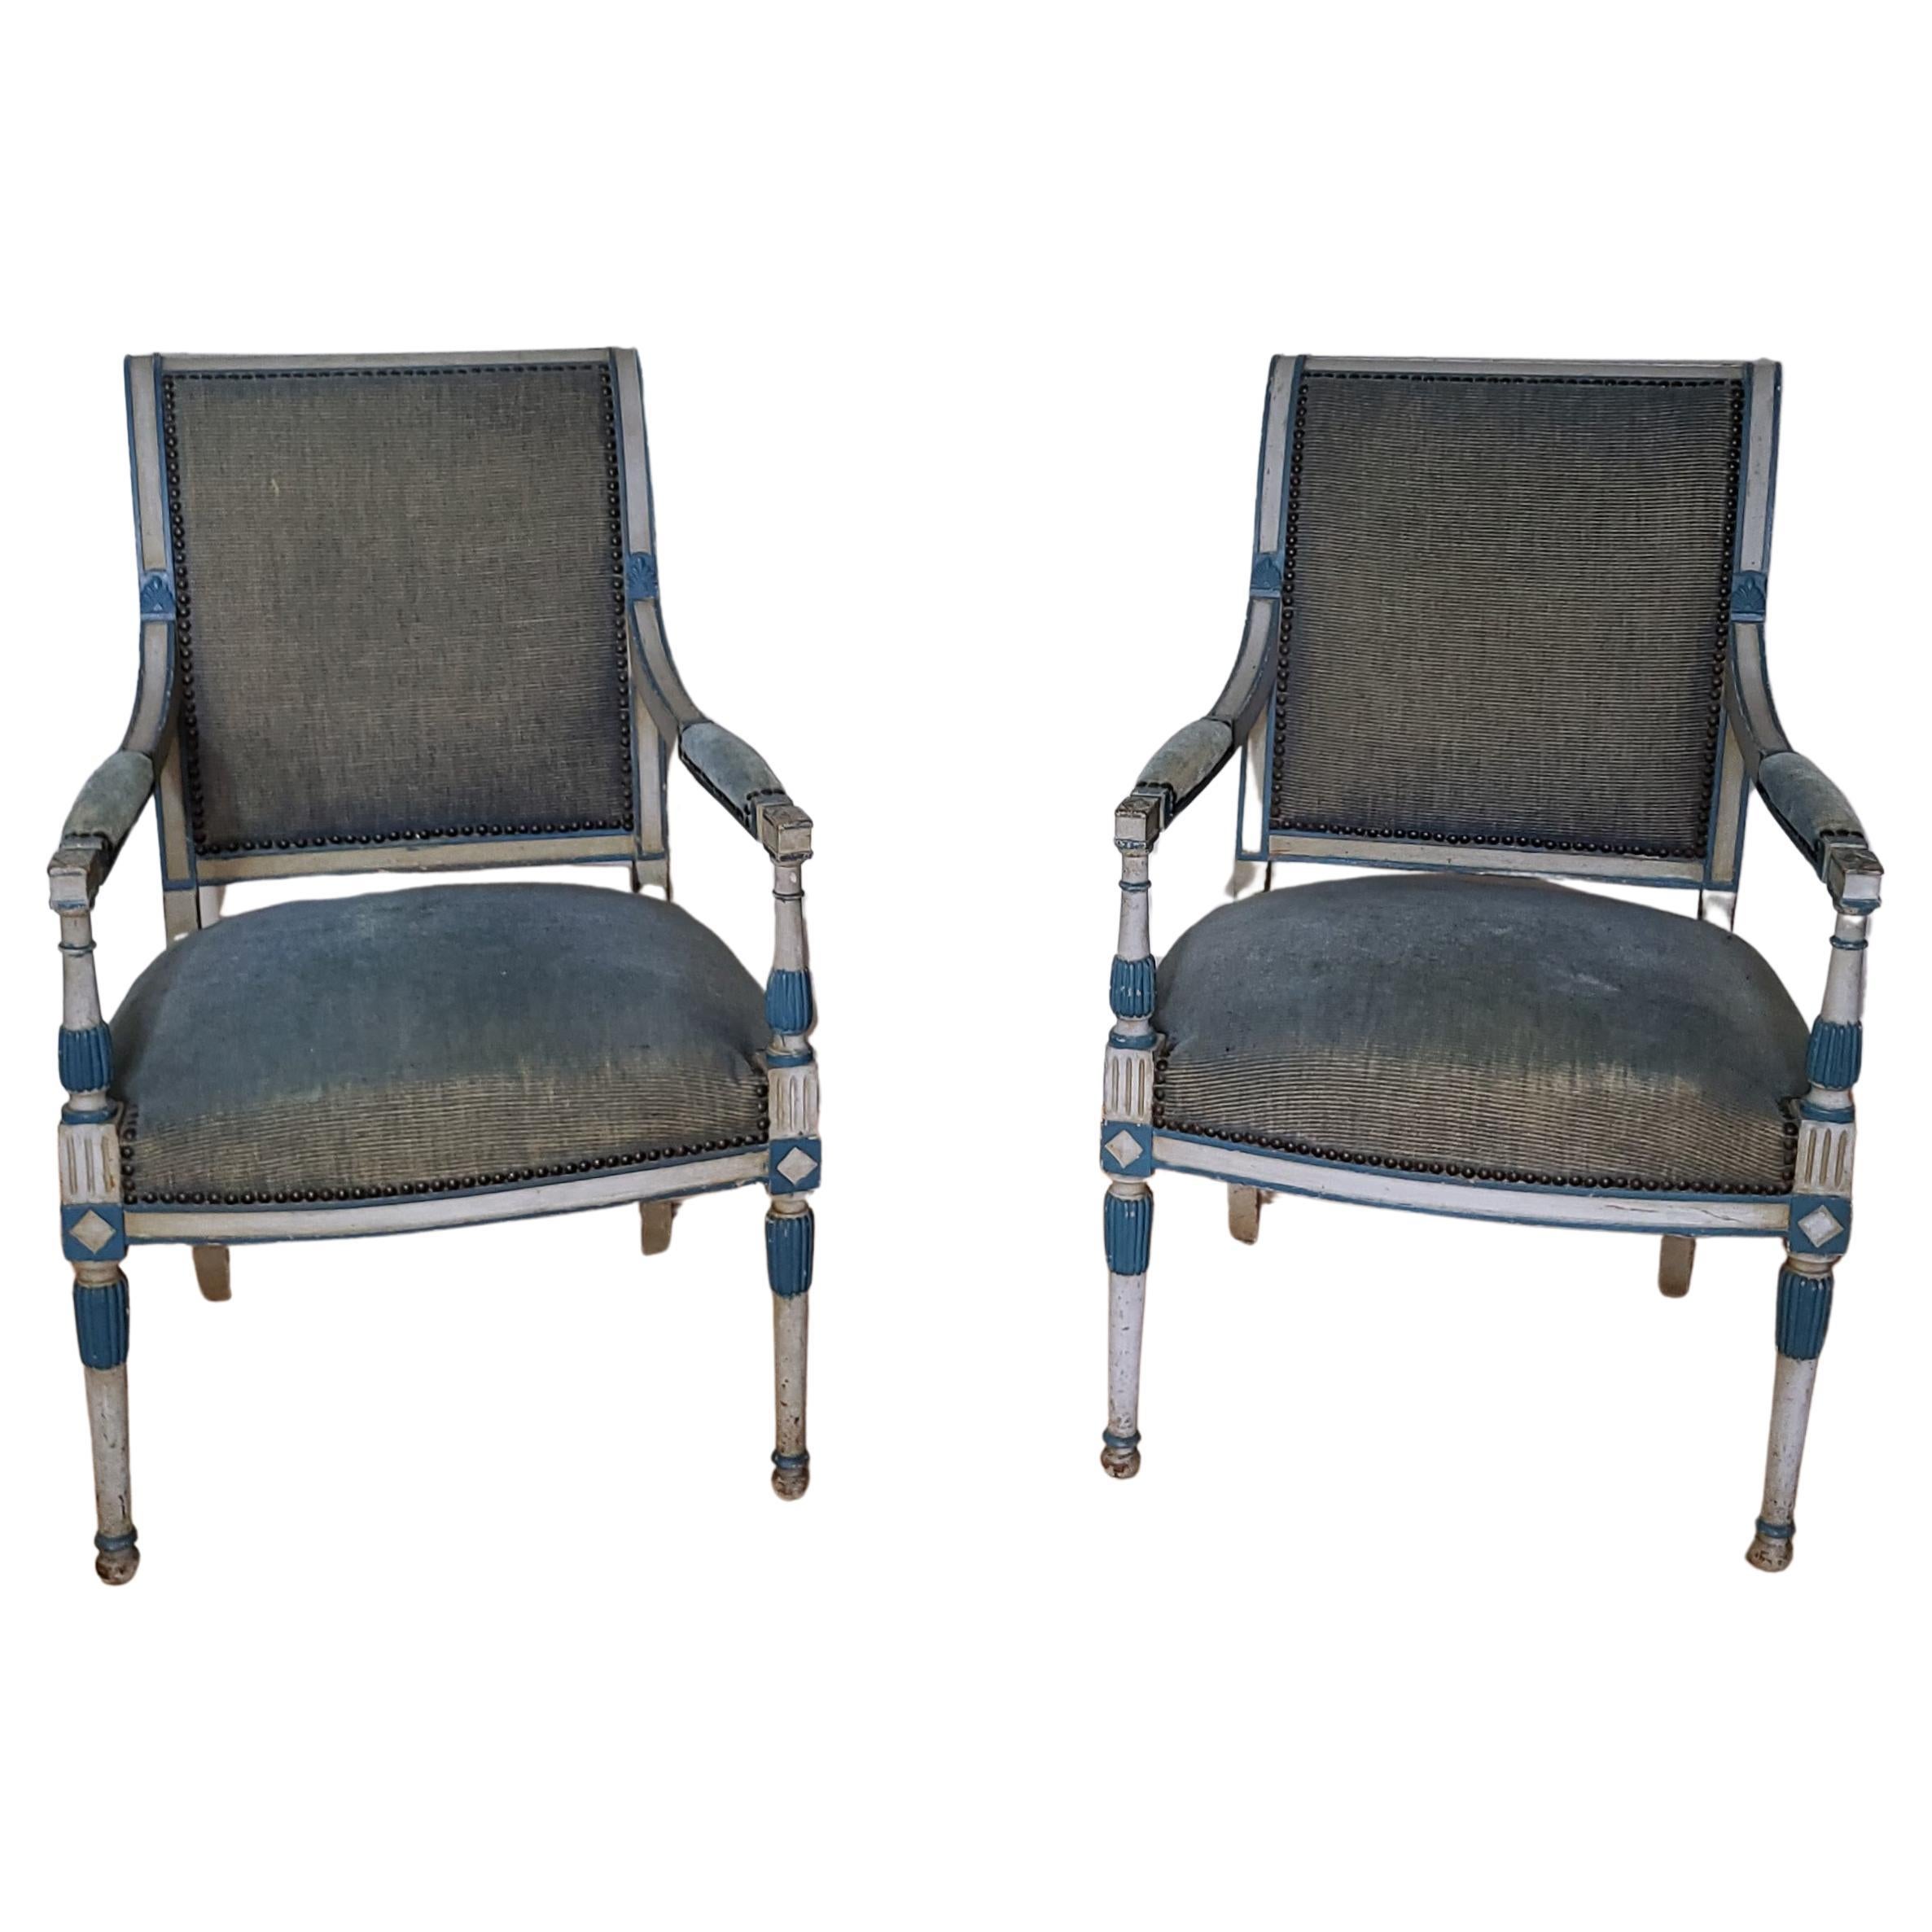 Pair of painted open armchairs/ fauteuils